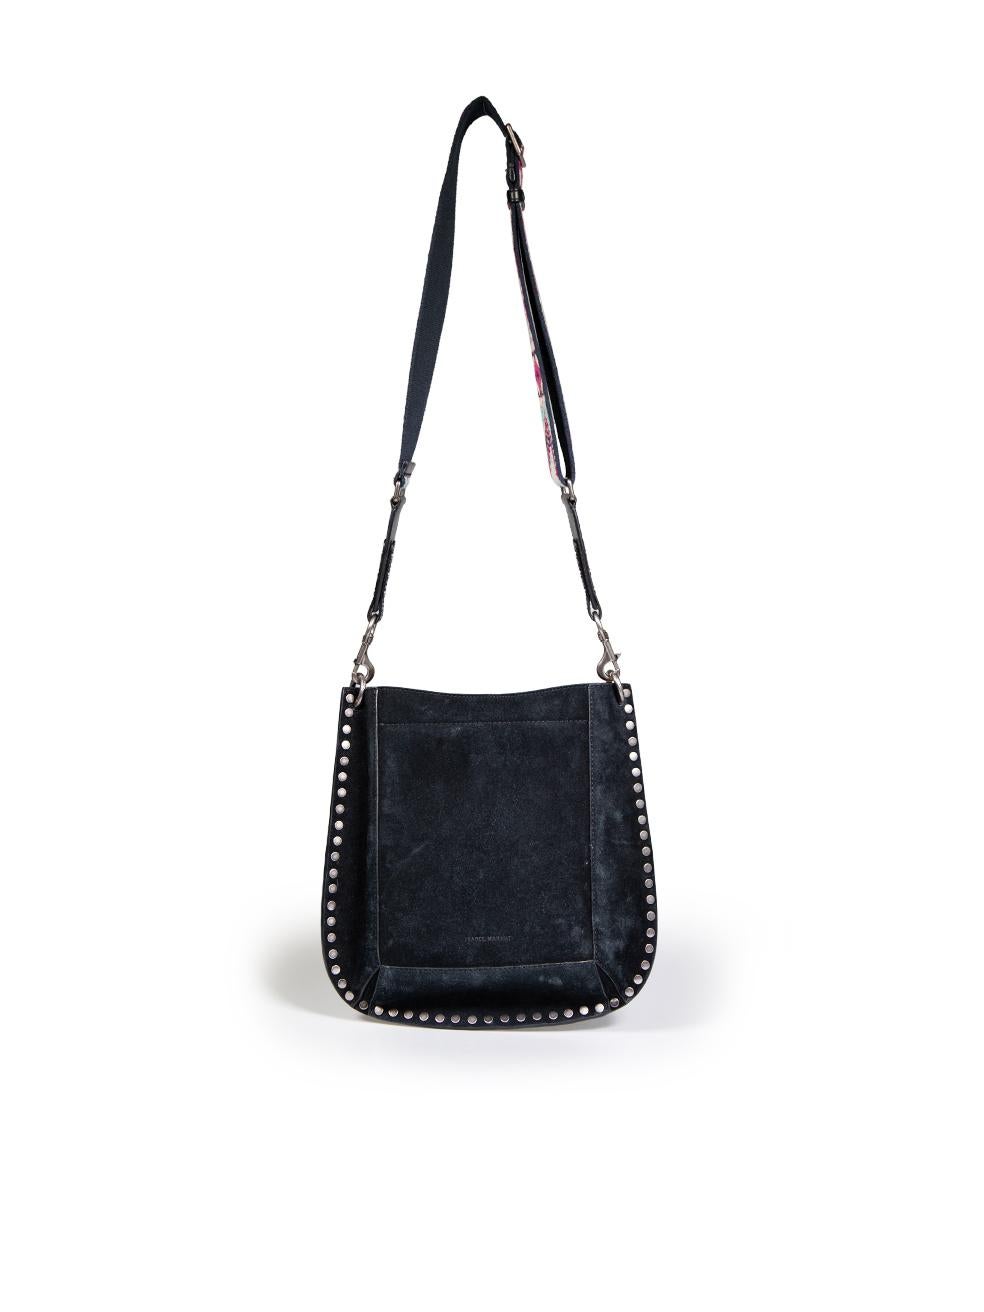 Isabel Marant Black Suede Embroidered Crossbody Bag In Excellent Condition For Sale In London, GB